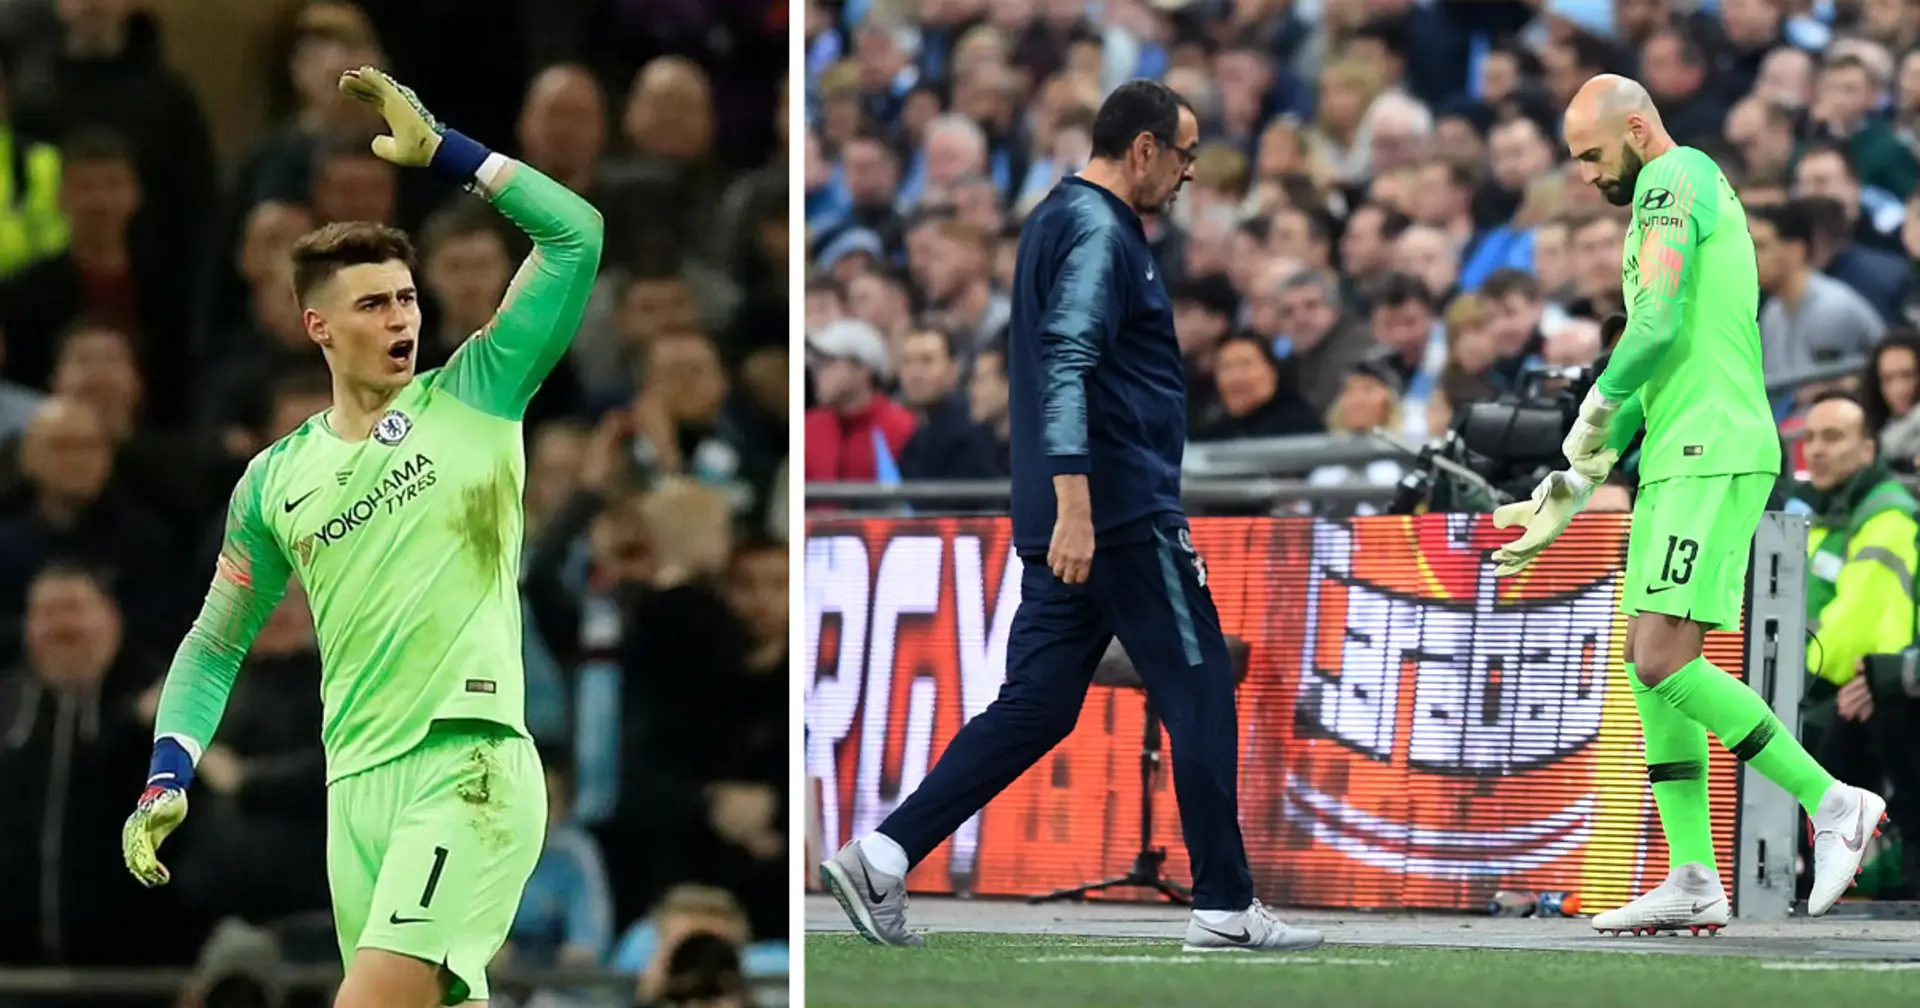  Five years ago, Kepa refused to come off the pitch in the EFL Cup final against Man City - no one understood this